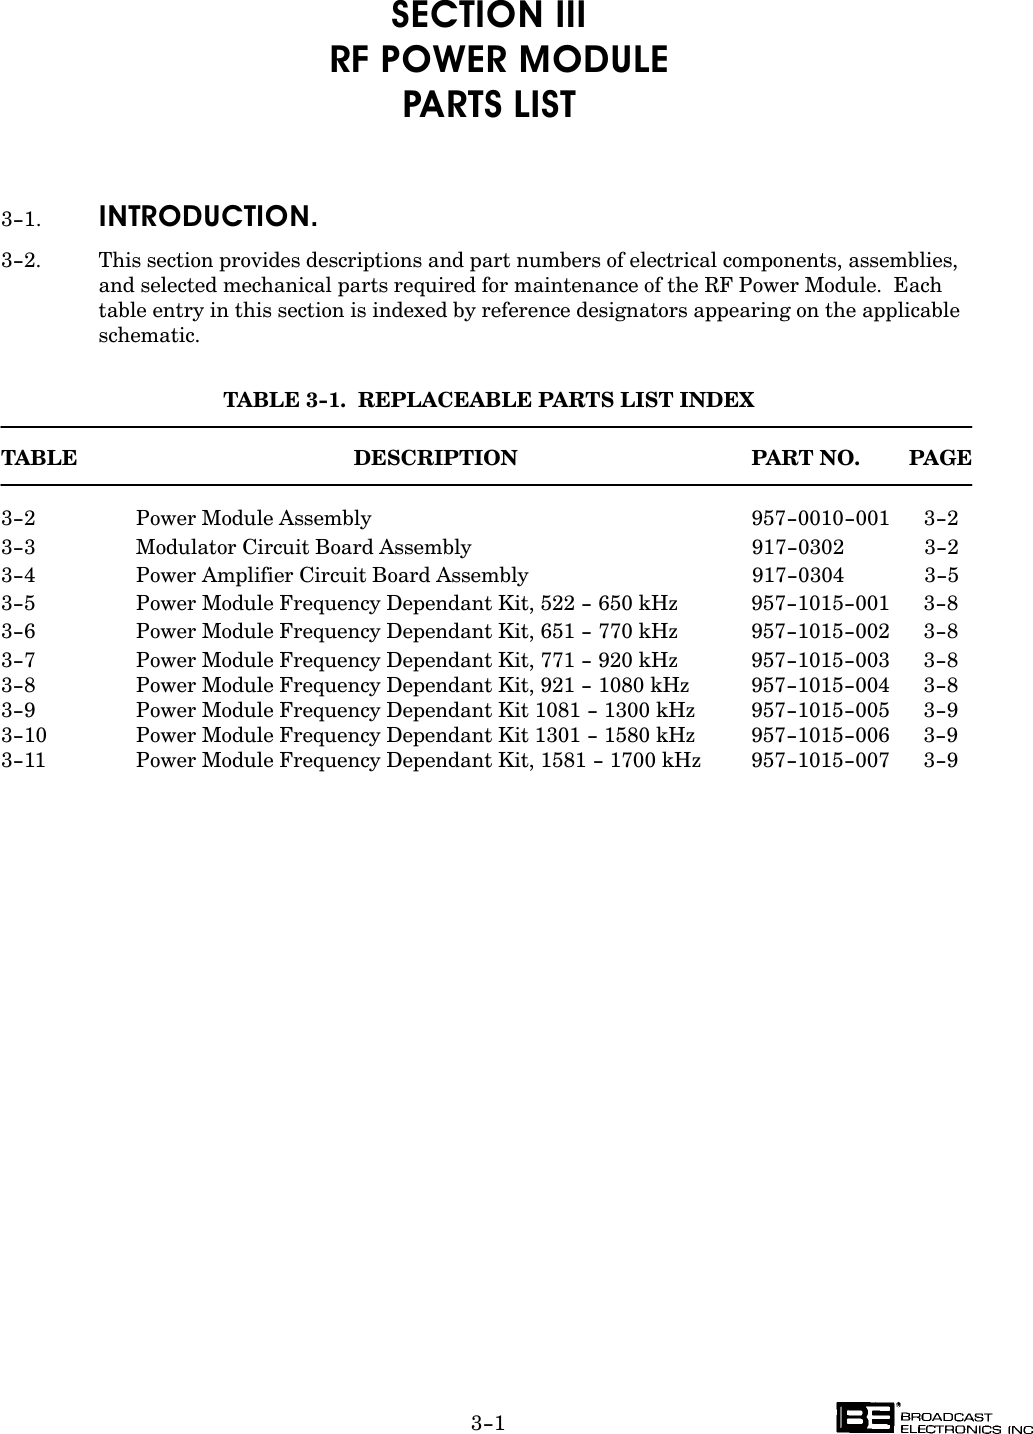 3-1SECTION III  RF POWER MODULEPARTS LIST3-1. INTRODUCTION.3-2. This section provides descriptions and part numbers of electrical components, assemblies,and selected mechanical parts required for maintenance of the RF Power Module.  Eachtable entry in this section is indexed by reference designators appearing on the applicableschematic.TABLE 3-1.  REPLACEABLE PARTS LIST INDEXTABLE DESCRIPTION PART NO. PAGE3-2 Power Module Assembly  957-0010-001 3-23-3 Modulator Circuit Board Assembly  917-0302 3-23-4 Power Amplifier Circuit Board Assembly  917-0304 3-53-5 Power Module Frequency Dependant Kit, 522 - 650 kHz 957-1015-001 3-83-6 Power Module Frequency Dependant Kit, 651 - 770 kHz  957-1015-002 3-83-7 Power Module Frequency Dependant Kit, 771 - 920 kHz  957-1015-003 3-83-8 Power Module Frequency Dependant Kit, 921 - 1080 kHz 957-1015-004 3-83-9 Power Module Frequency Dependant Kit 1081 - 1300 kHz 957-1015-005 3-93-10 Power Module Frequency Dependant Kit 1301 - 1580 kHz 957-1015-006 3-93-11 Power Module Frequency Dependant Kit, 1581 - 1700 kHz 957-1015-007 3-9